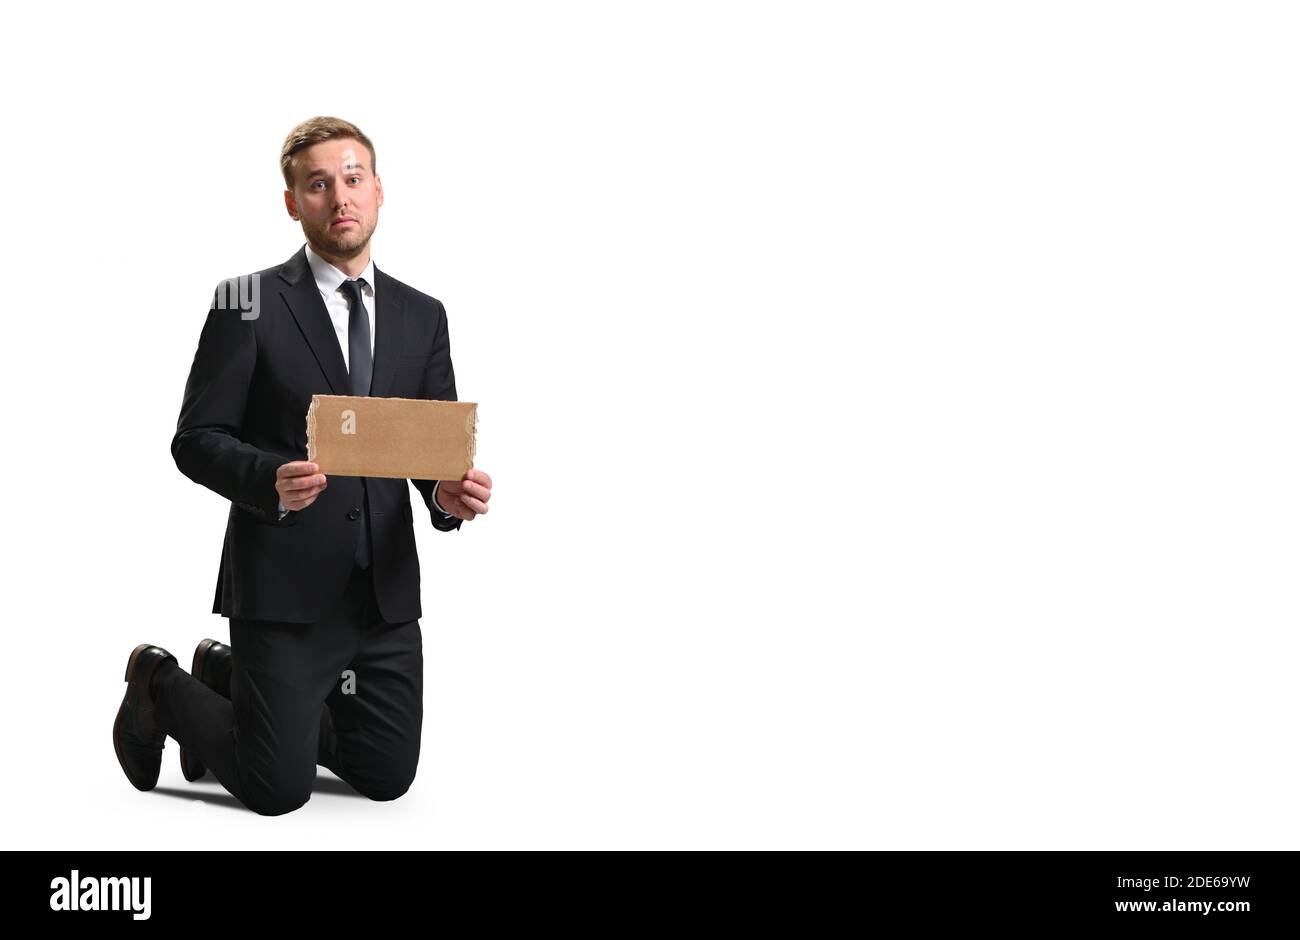 Dismissed manager showing empty cardboard poster on a white background, unemployment and poverty Stock Photo